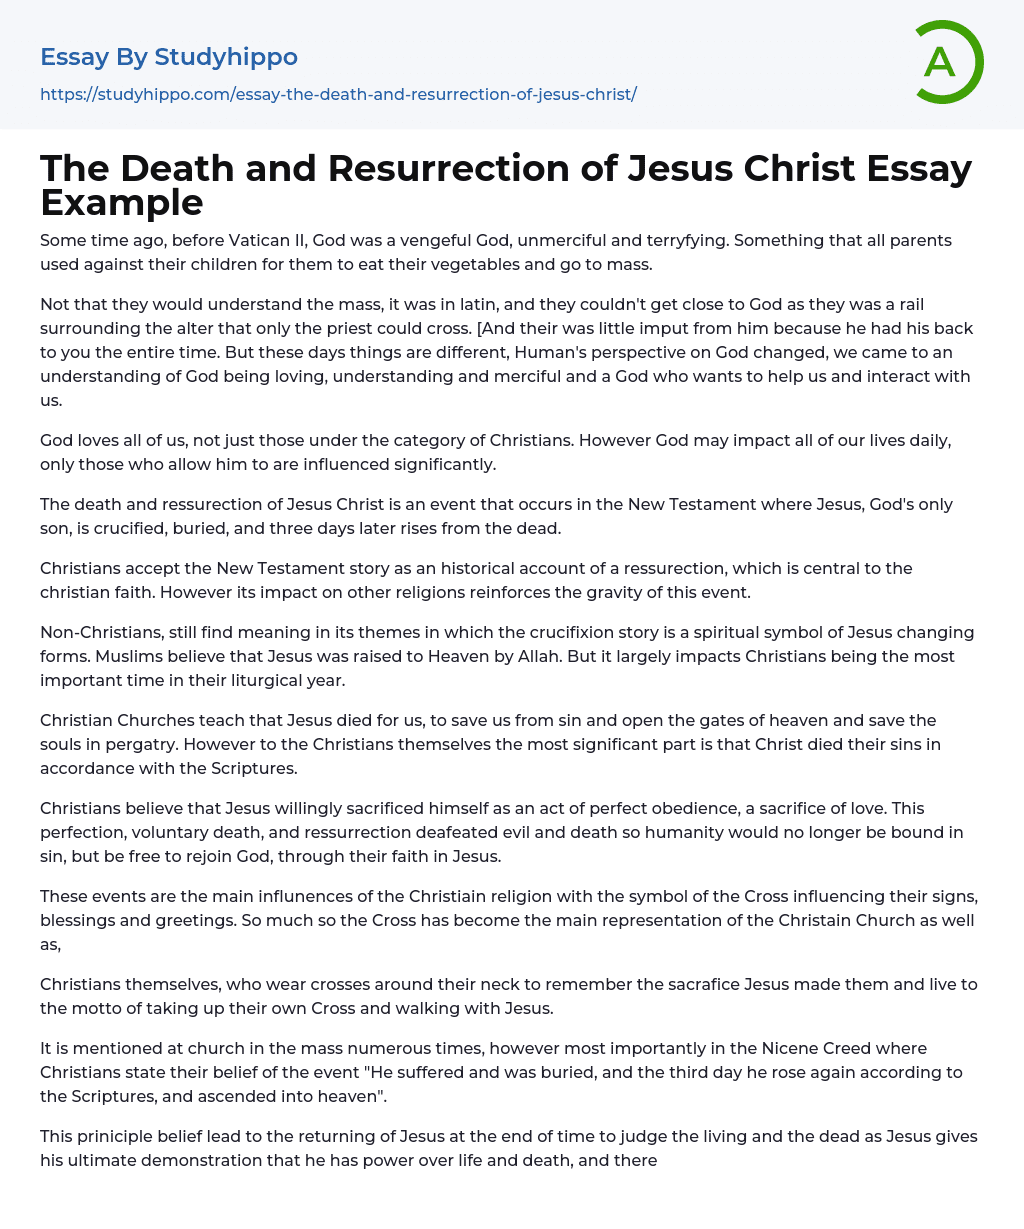 The Death and Resurrection of Jesus Christ Essay Example